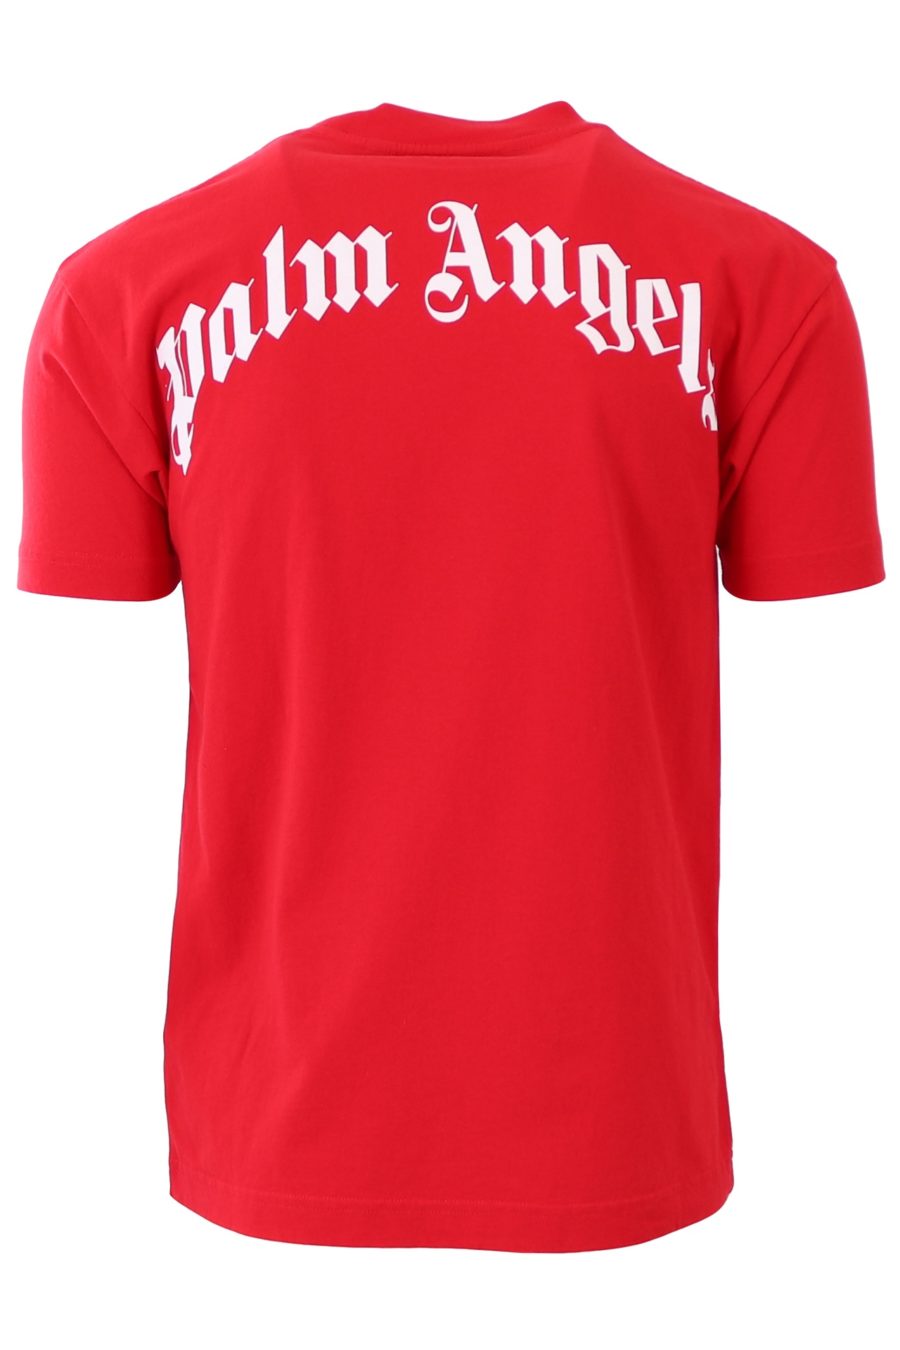 Palm Angels - Palm Angels T-shirt red with bear - BLS Fashion